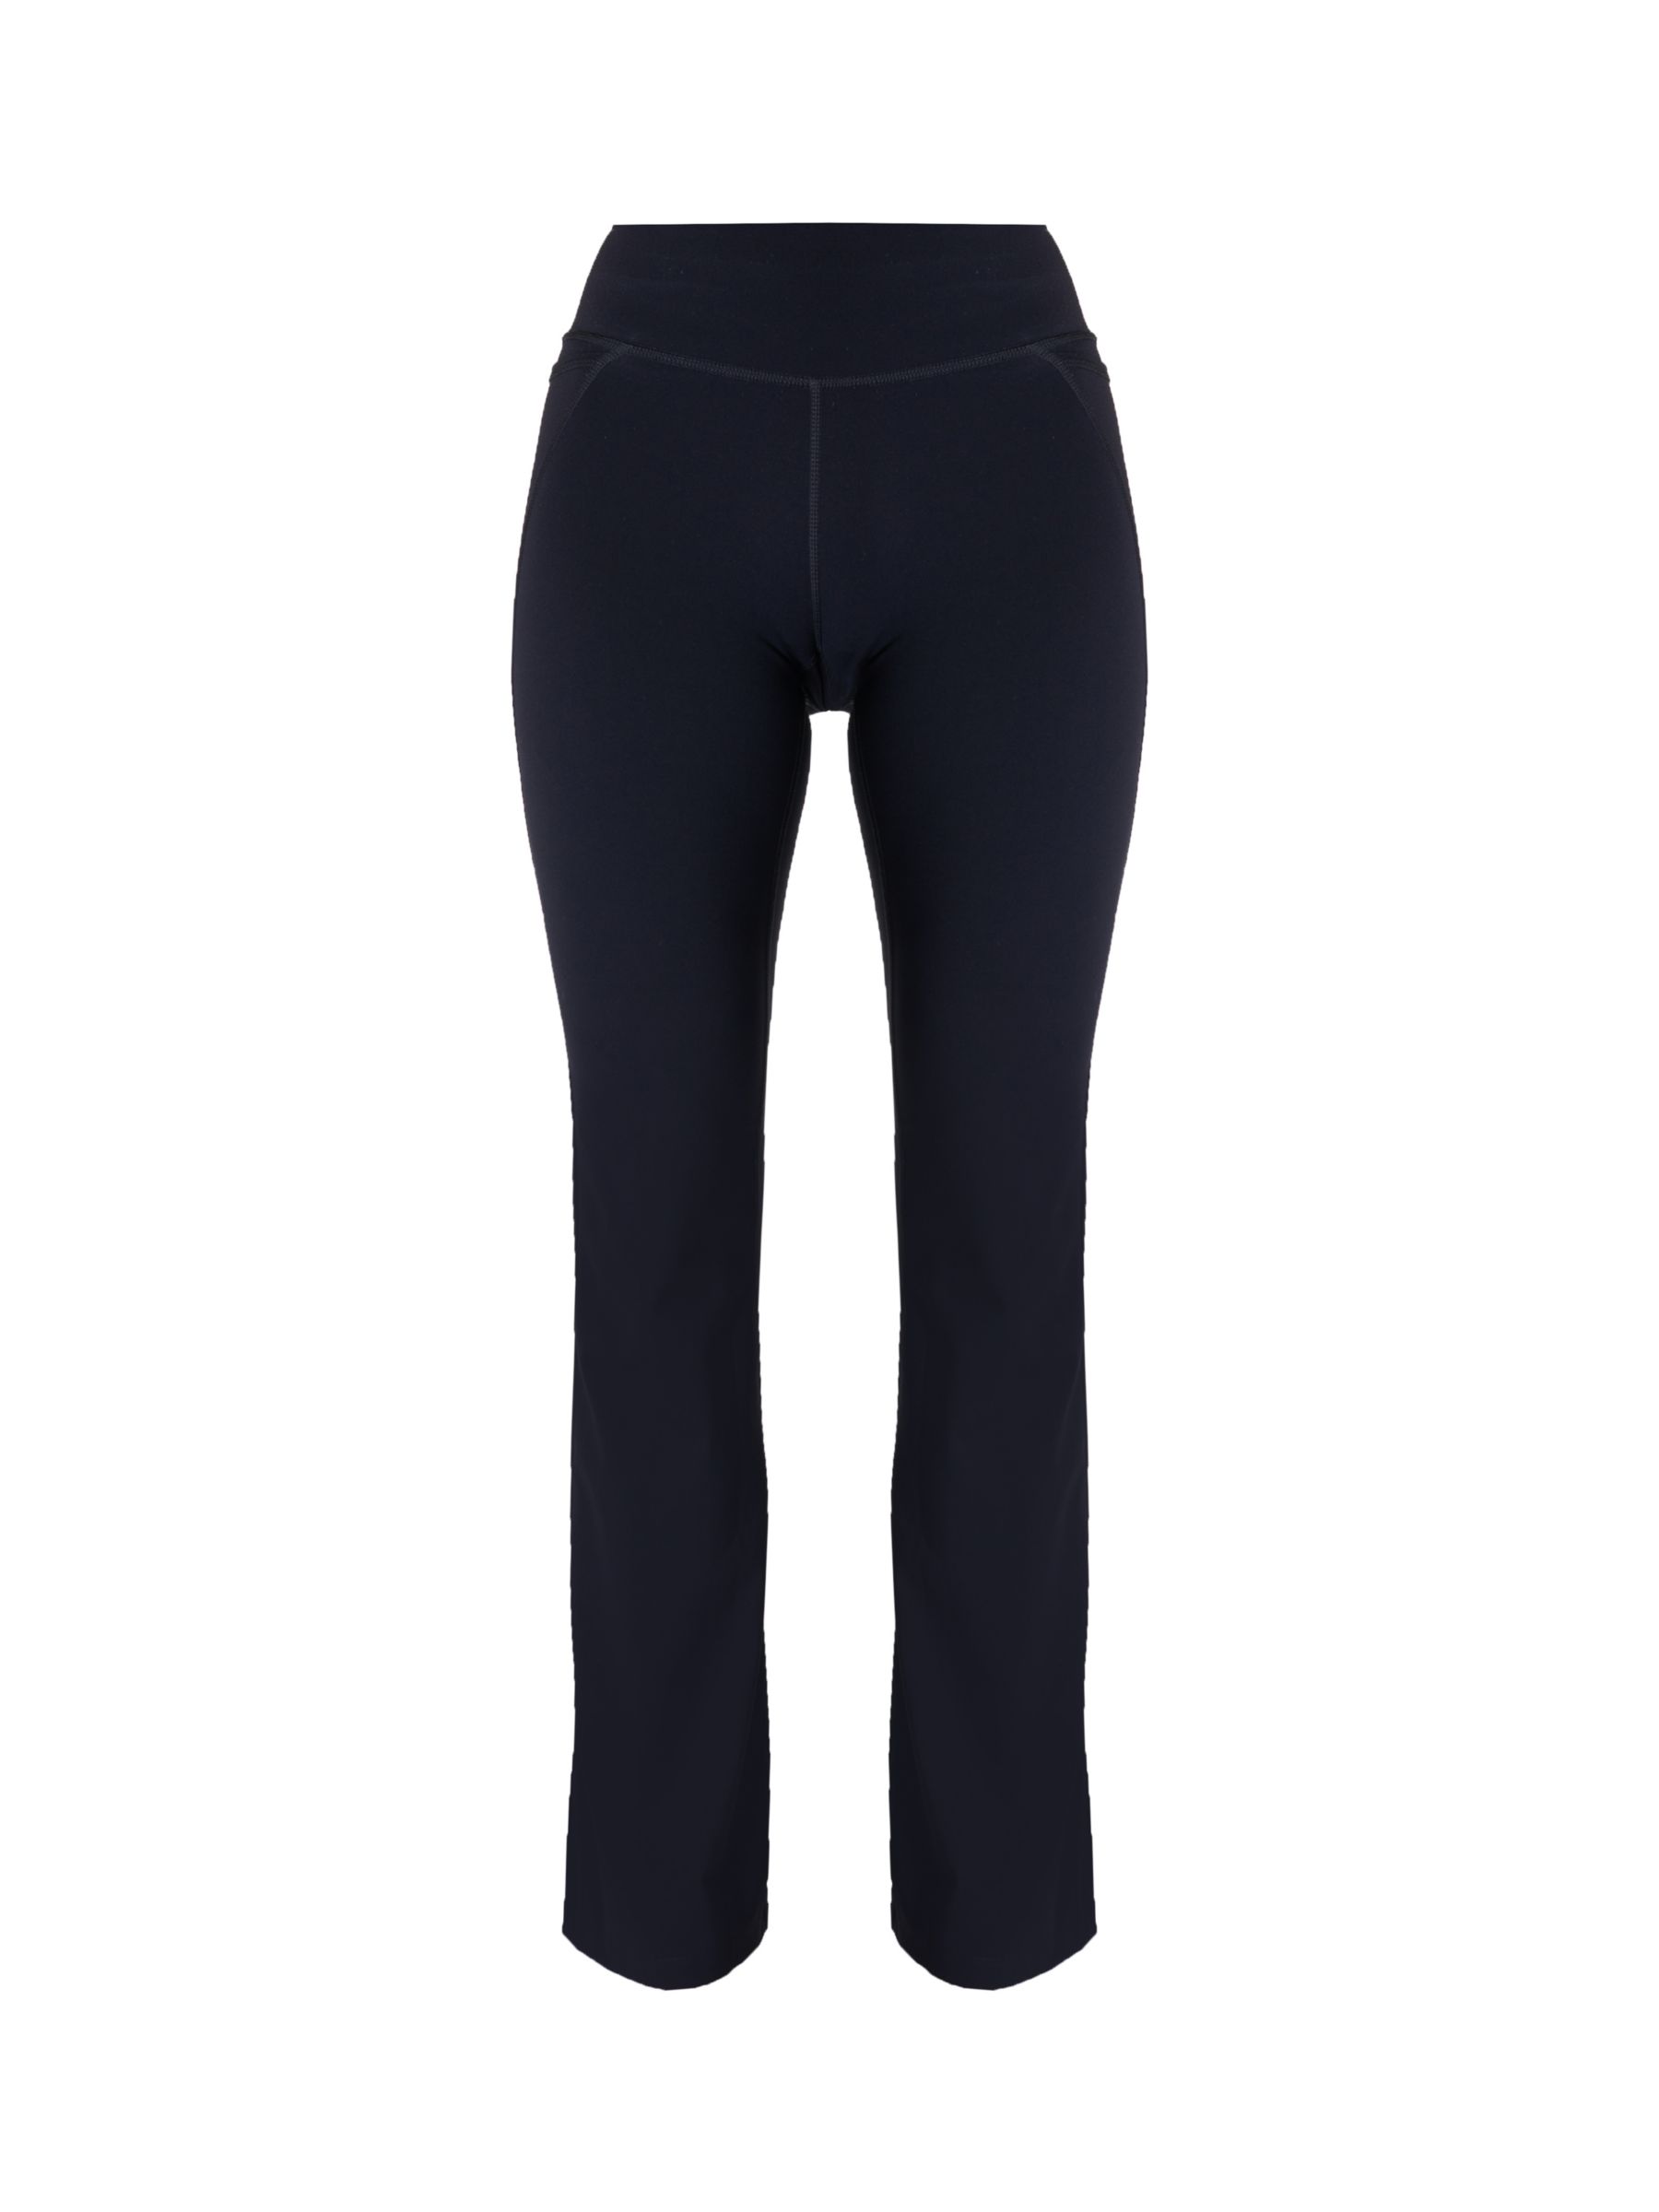 Buy Sweaty Betty 30" Power Bootcut Gym Trousers Online at johnlewis.com